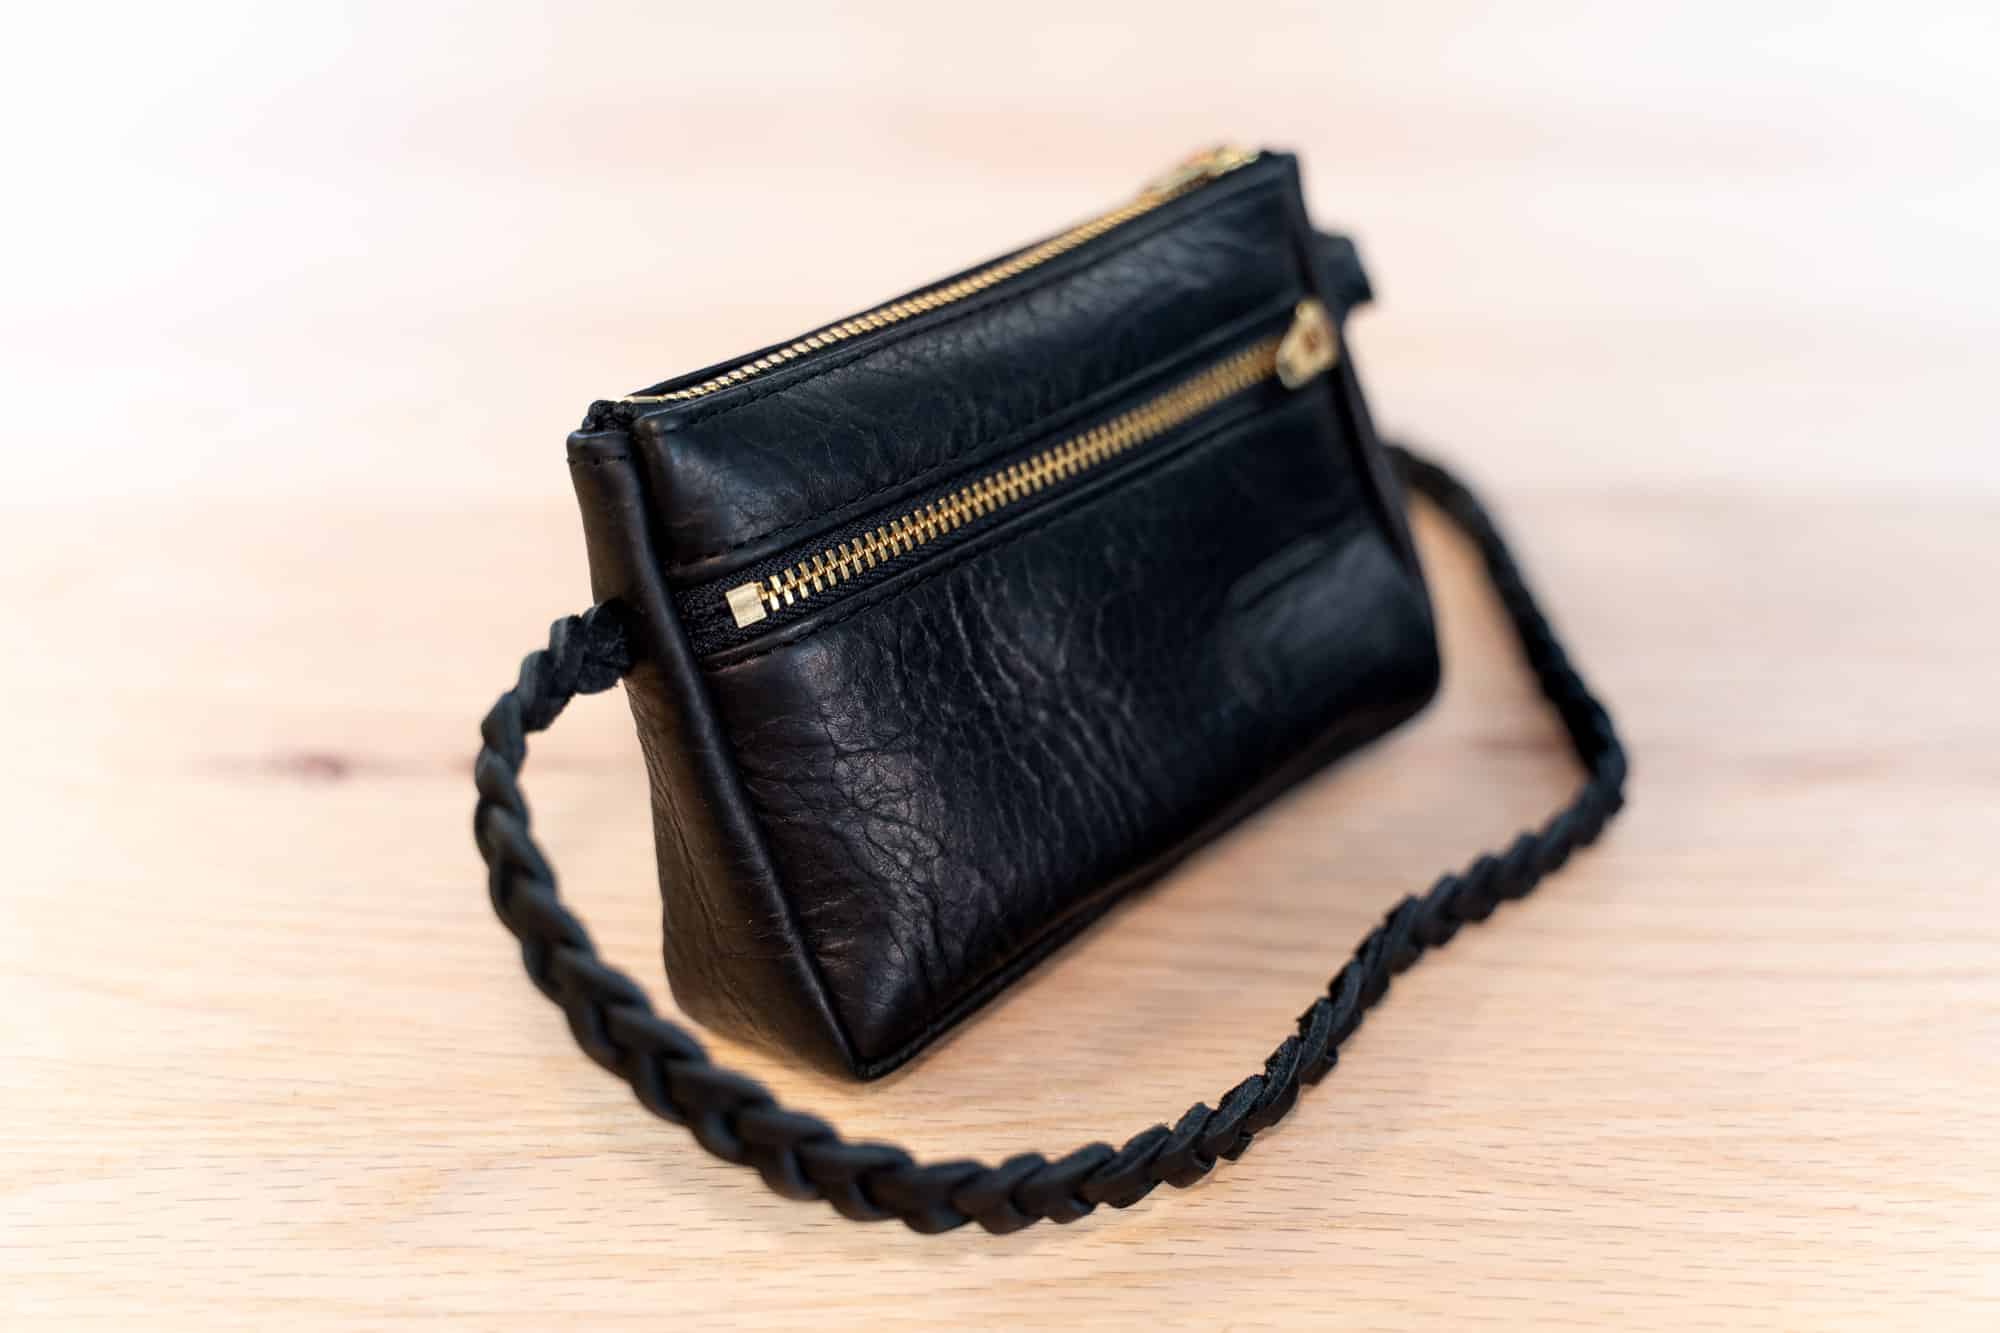 Small Zipper Bag with Braided Leather Strap - Brown